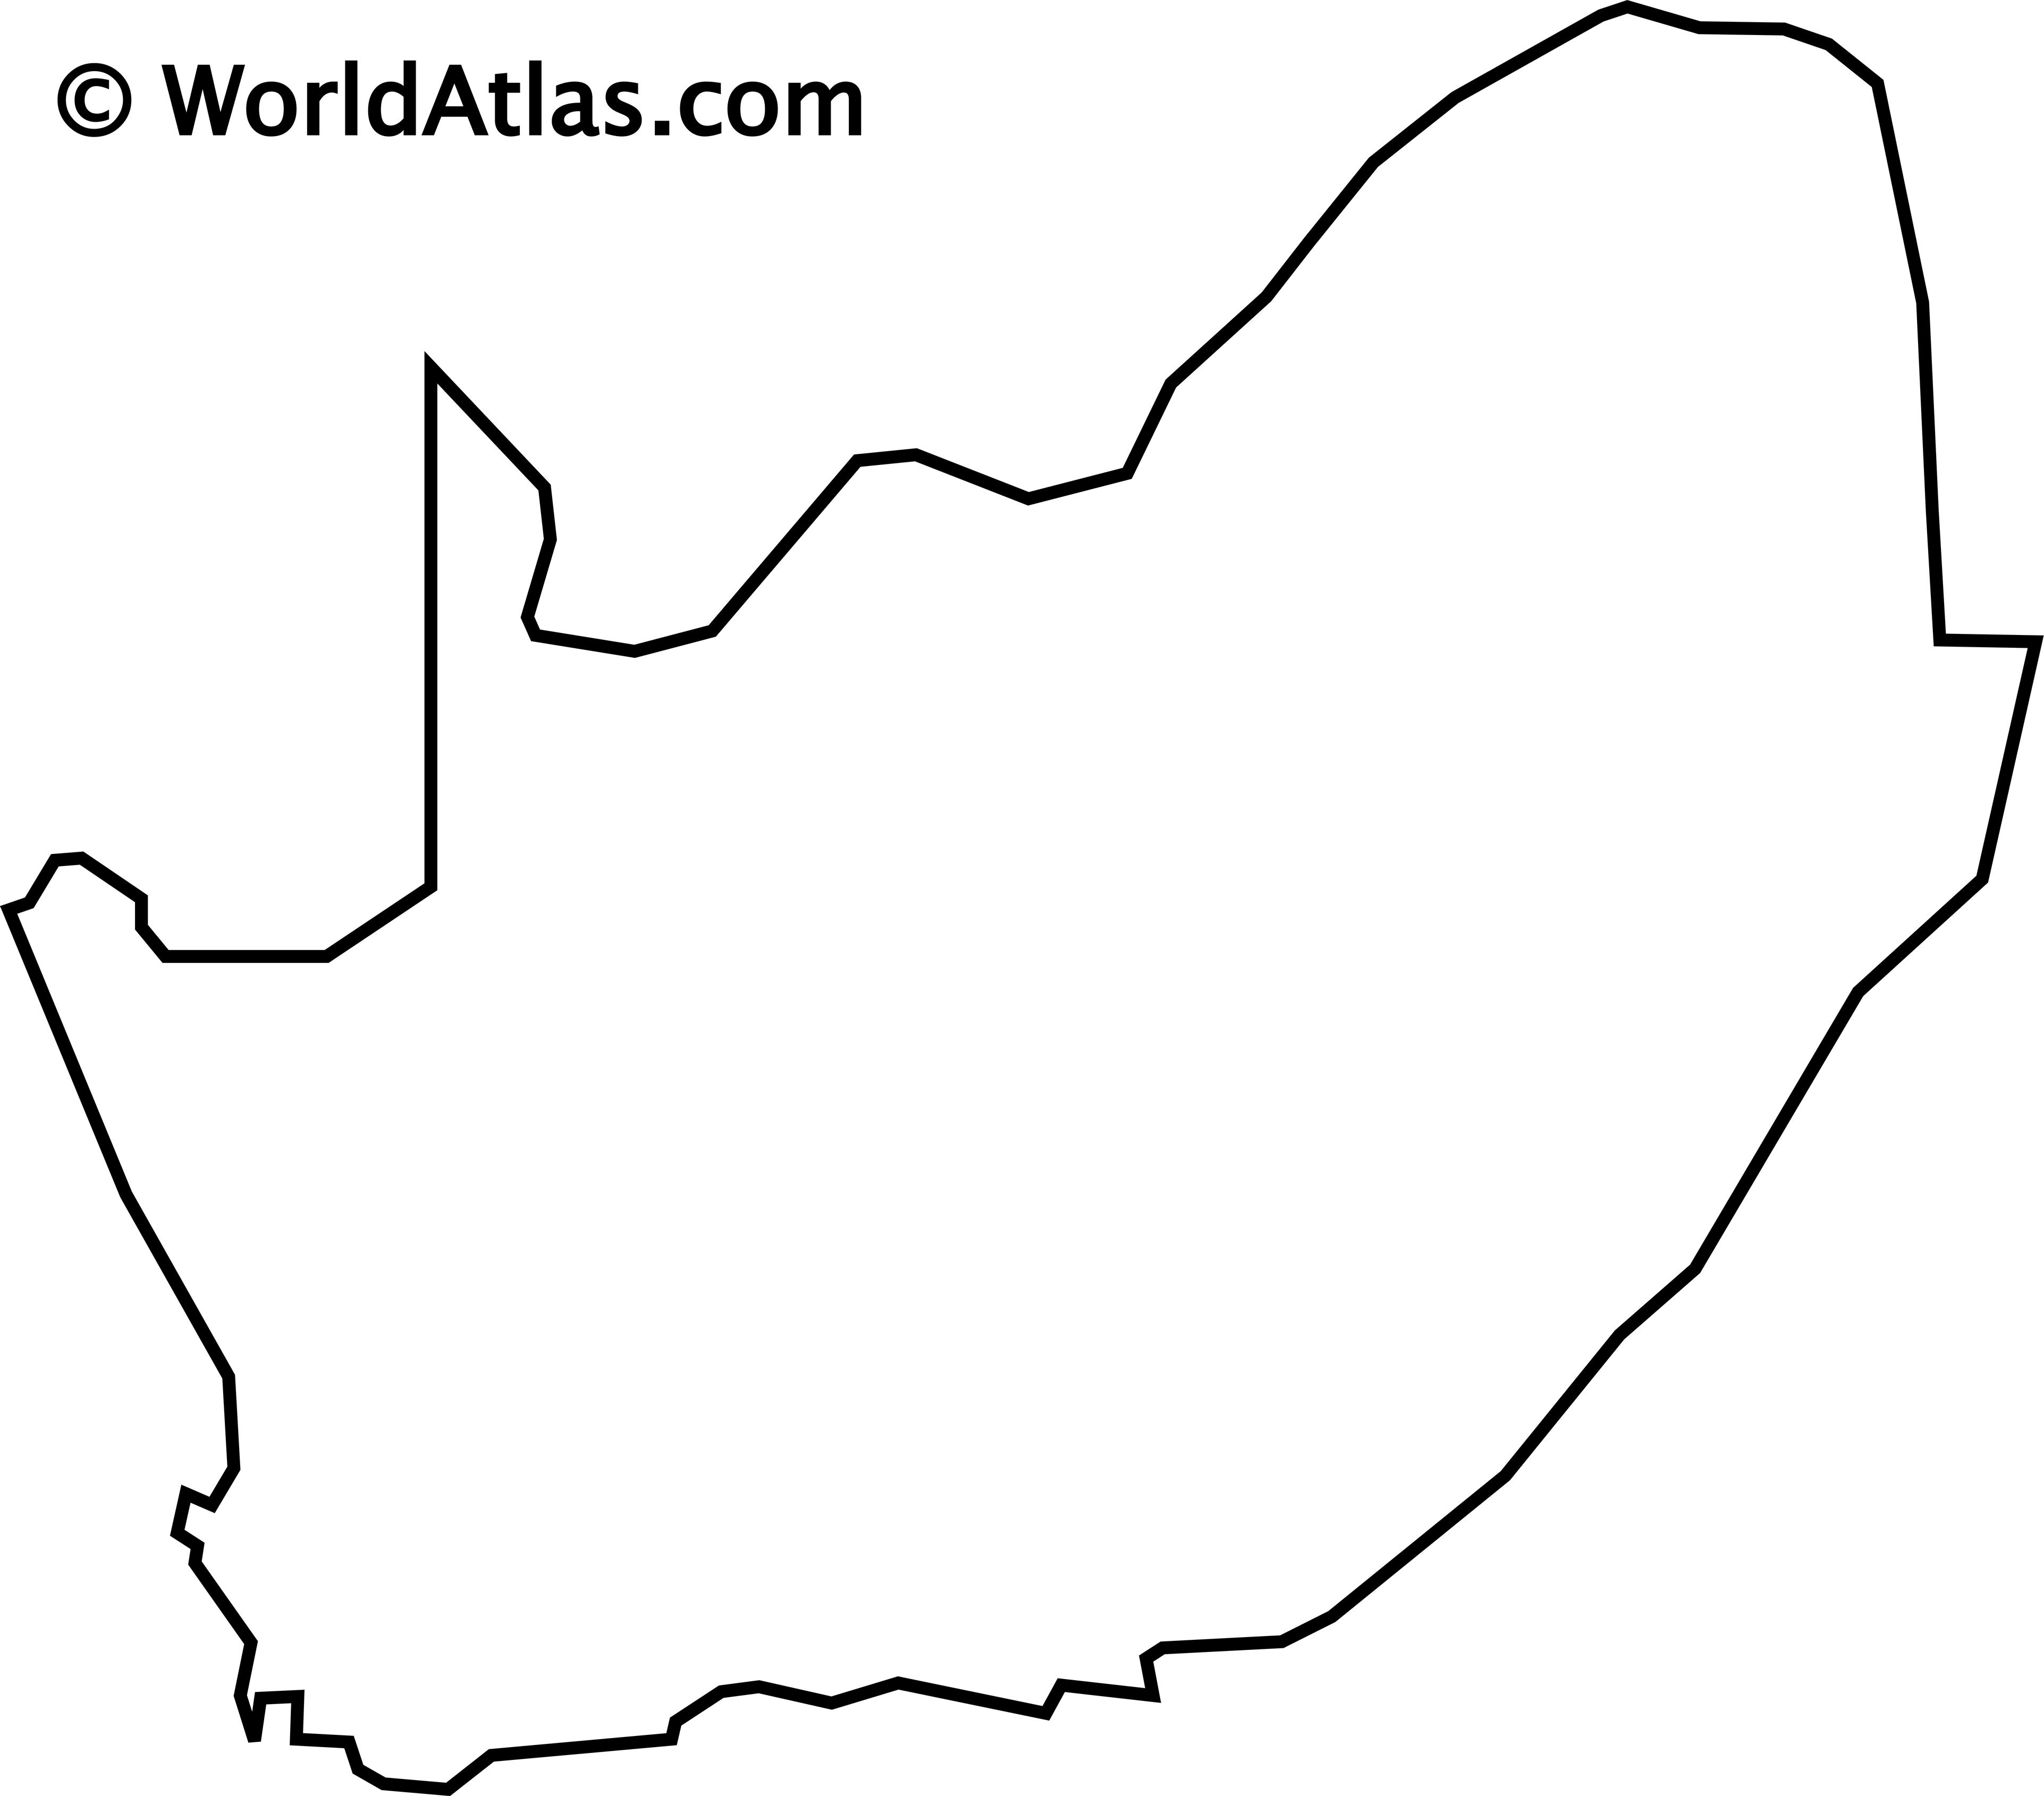 World Atlas Map Of Africa. Outline Map of South Africa